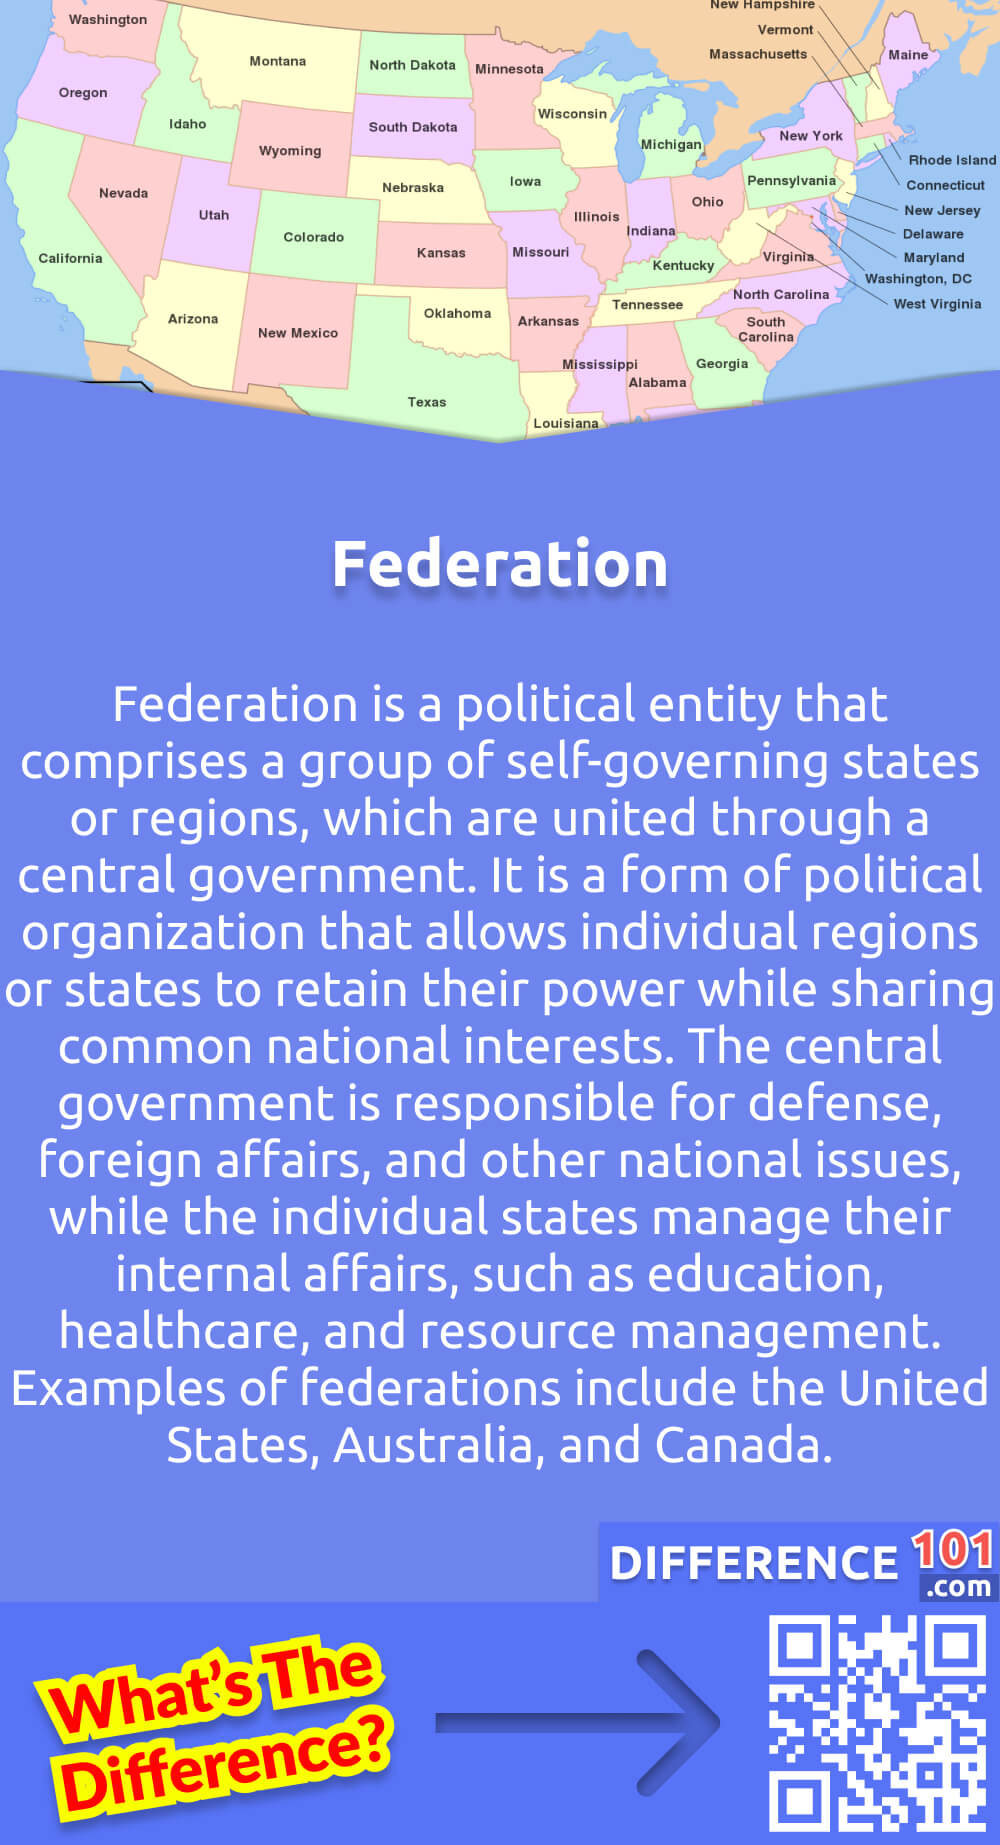 What Is Federation? Federation is a political entity that comprises a group of self-governing states or regions, which are united through a central government. It is a form of political organization that allows individual regions or states to retain their power while sharing common national interests. The central government is responsible for defense, foreign affairs, and other national issues, while the individual states manage their internal affairs, such as education, healthcare, and resource management. Federations offer several advantages, such as the ability to balance regional needs with national priorities, promote cultural diversity, and improve economic stability. Examples of federations include the United States, Australia, and Canada.